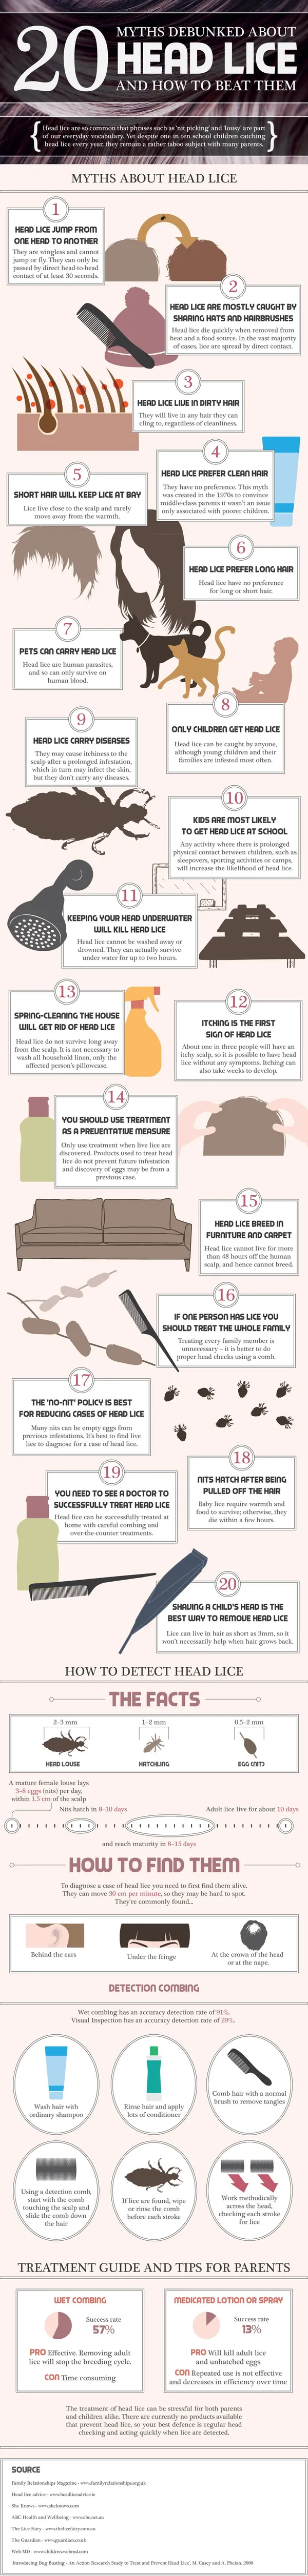 20-facts-about-headlice